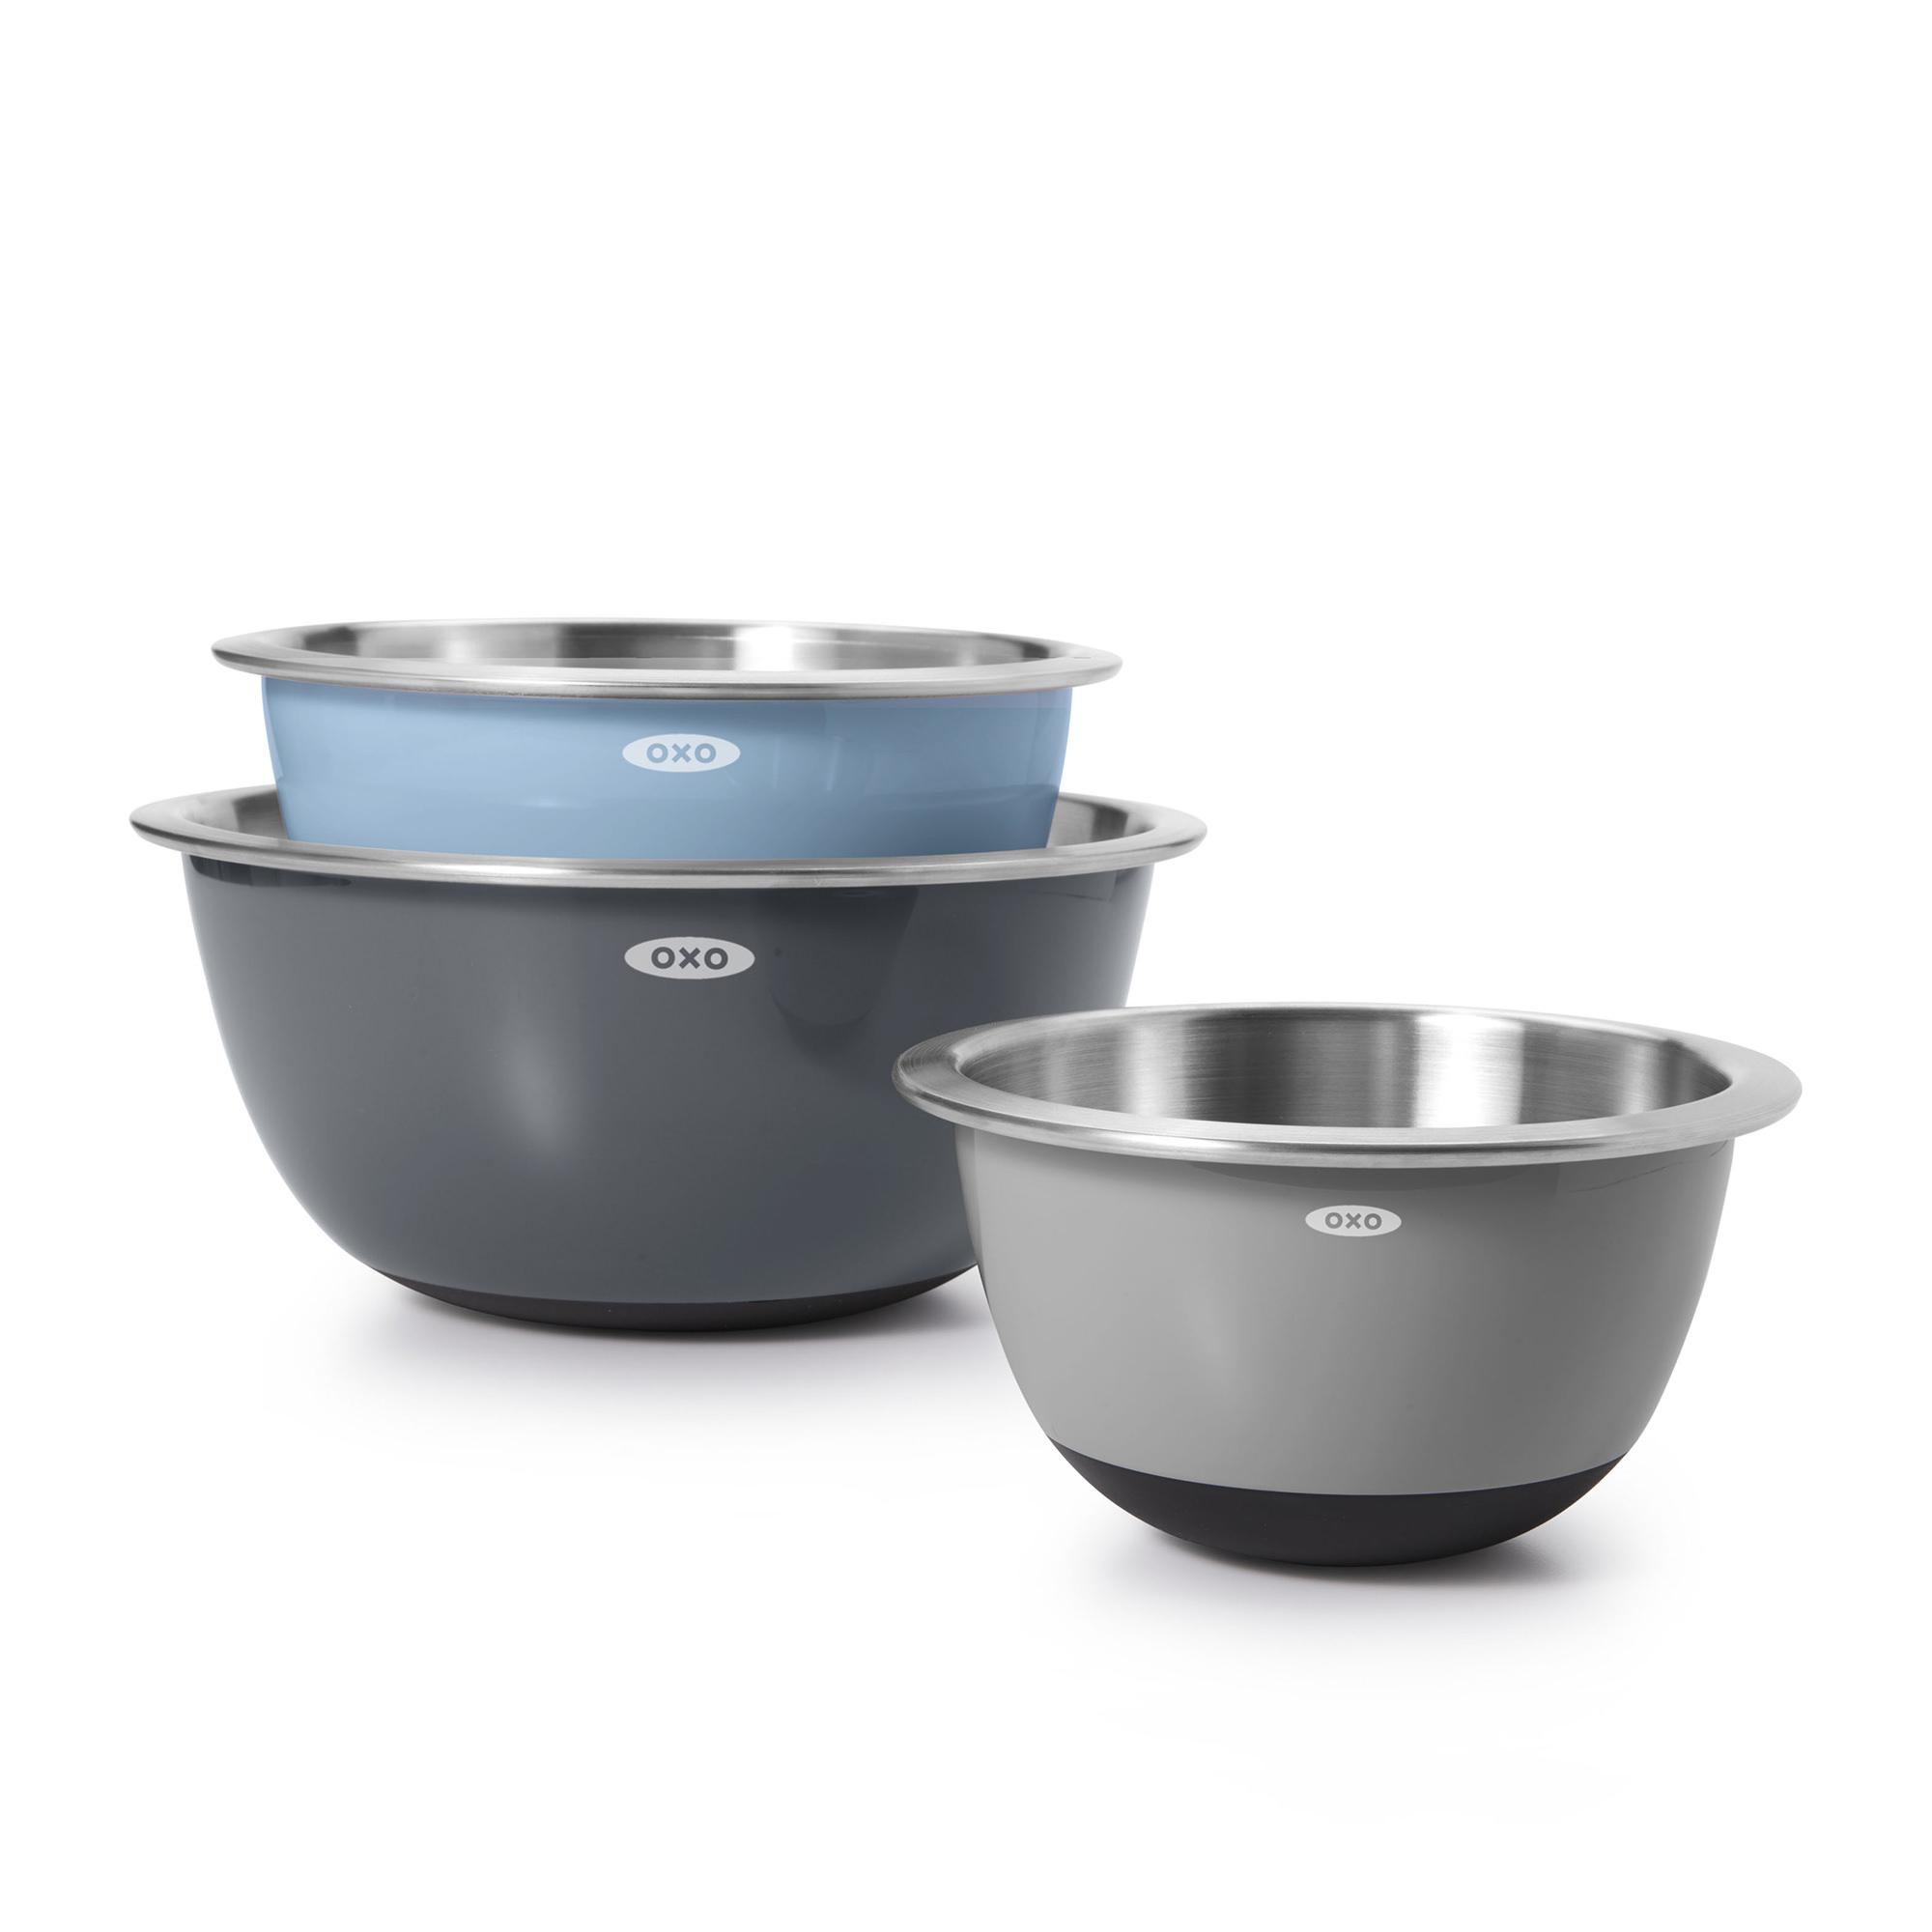 OXO Good Grips Stainless Steel Insulated Mixing Bowl Set 3pc Image 6